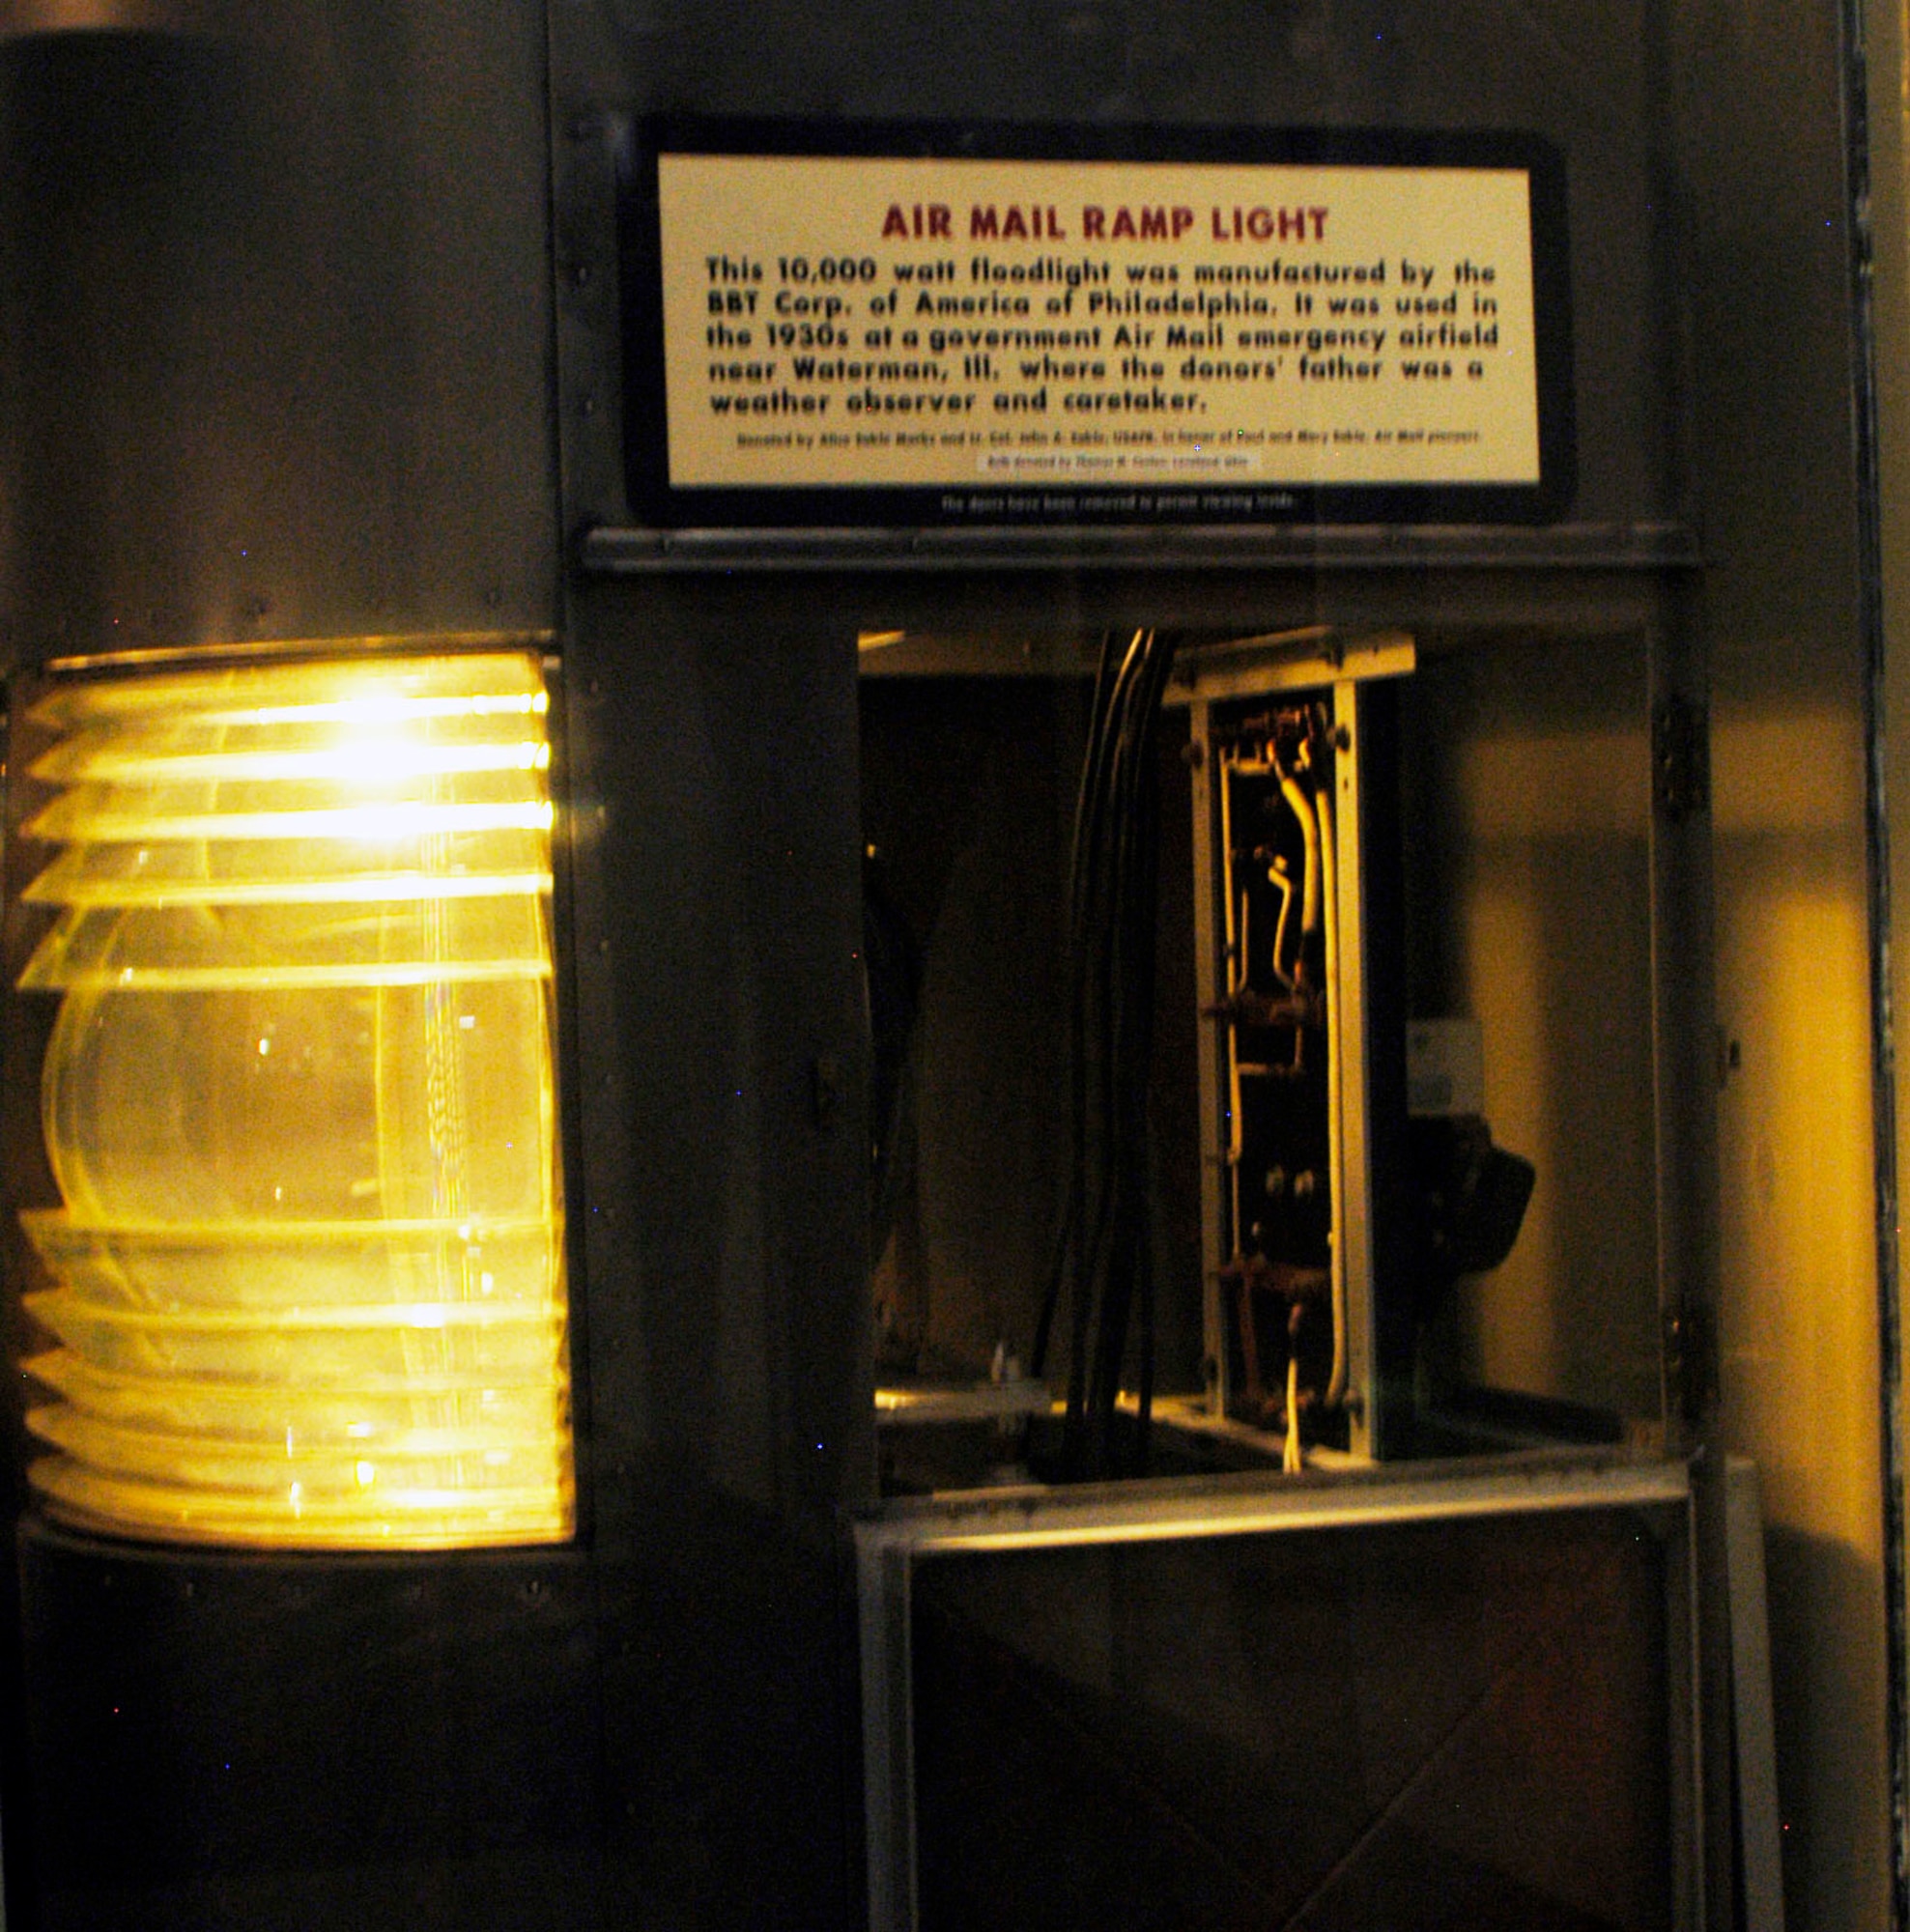 DAYTON, Ohio -- Air Mail Ramp Light exhibit in the Early Years Gallery at the National Museum of the United States Air Force. (U.S. Air Force photo)